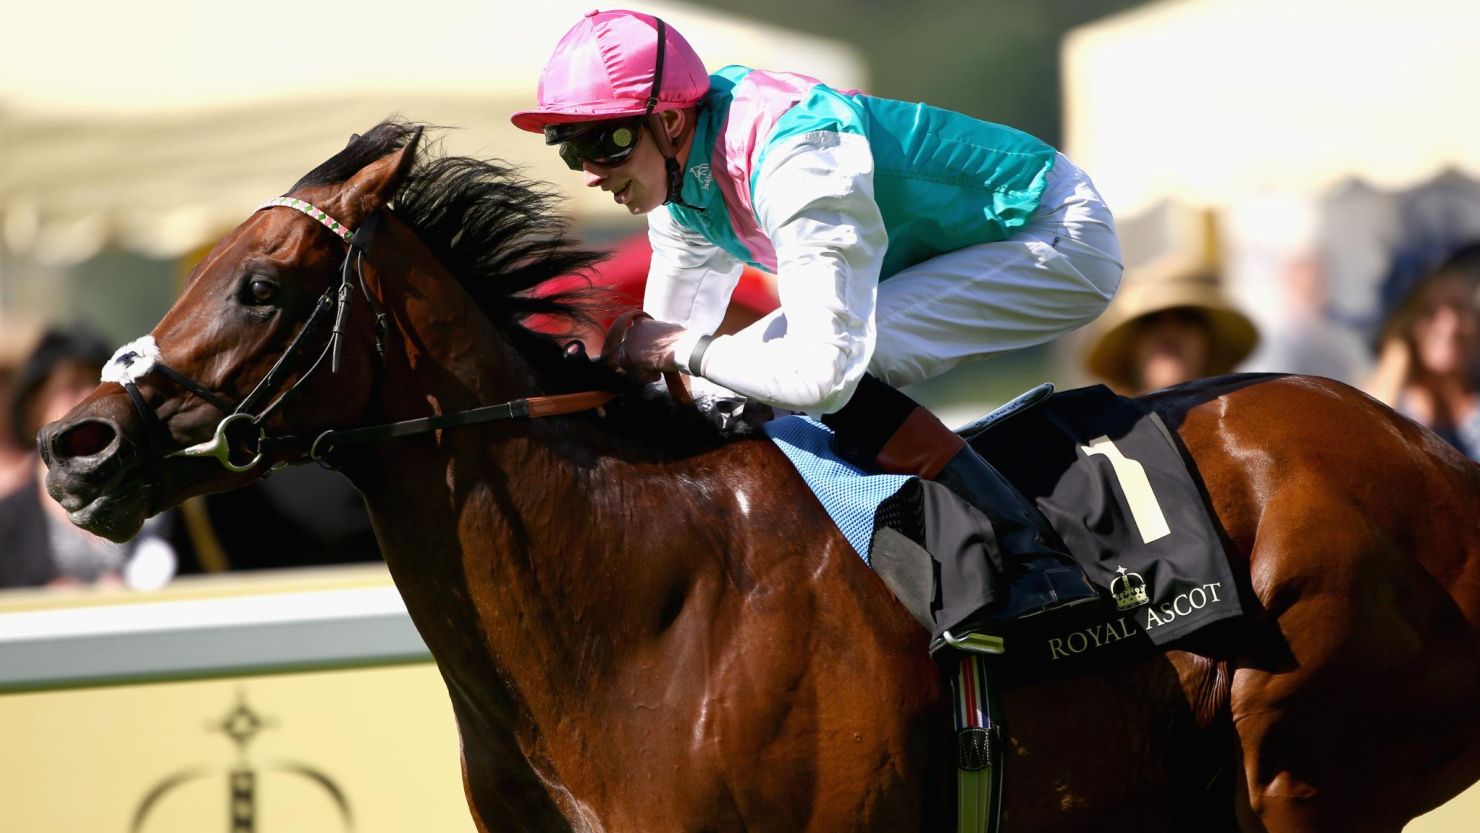 Jockey James Doyle riding Kingman to win the St James's Palace Stakes at Royal Ascot in 2014.